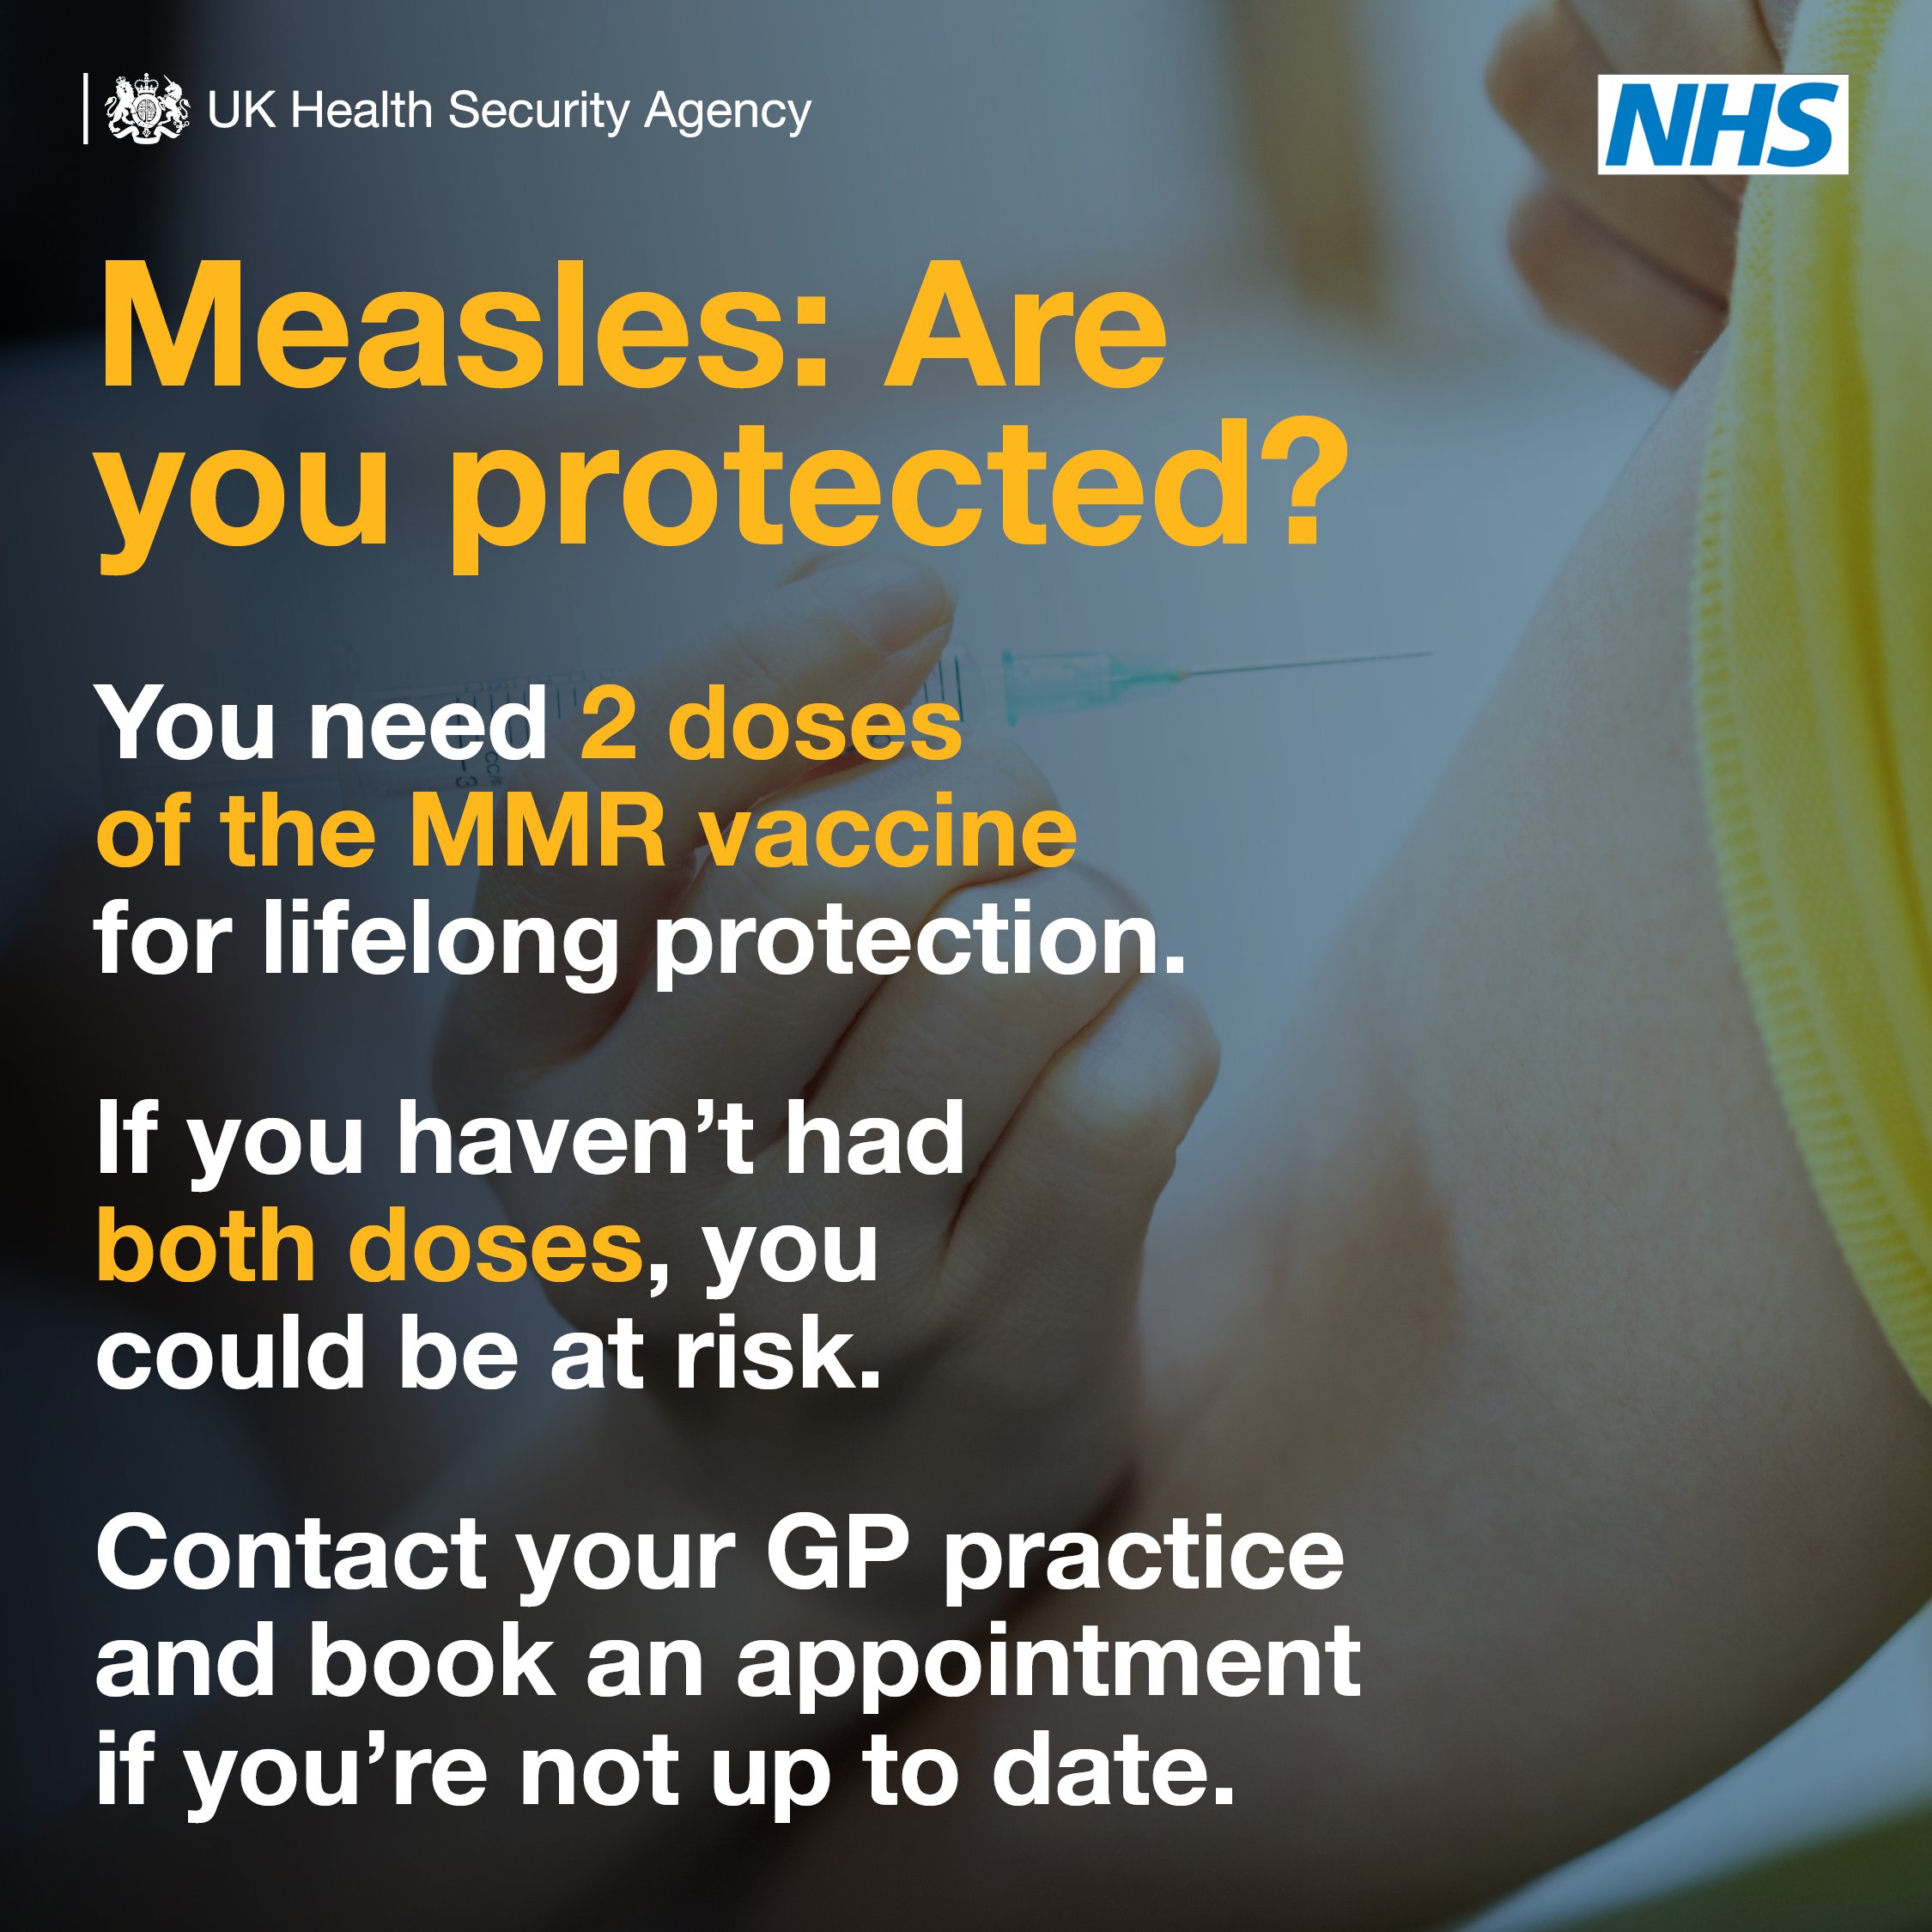 Measles: Are you protected? You need 2 doses of the MMR vaccine for lifelong protection. If you haven't had both doses, you could be at risk. Contact your GP practice and book an appointment if you're not up to date.